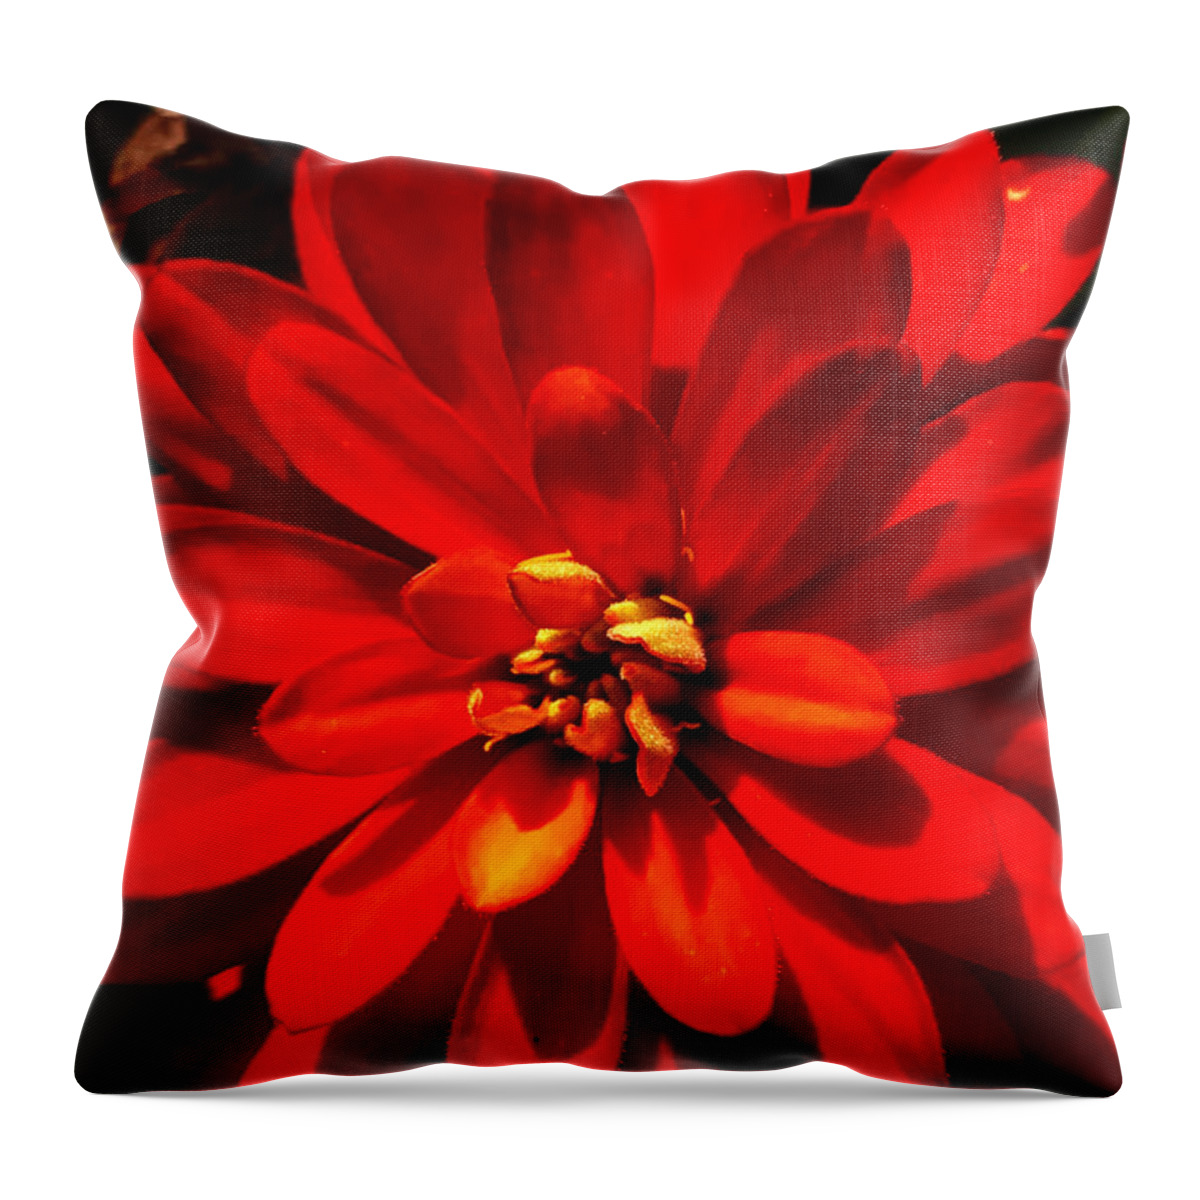 Art Throw Pillow featuring the photograph Morning Star by Jeff Iverson